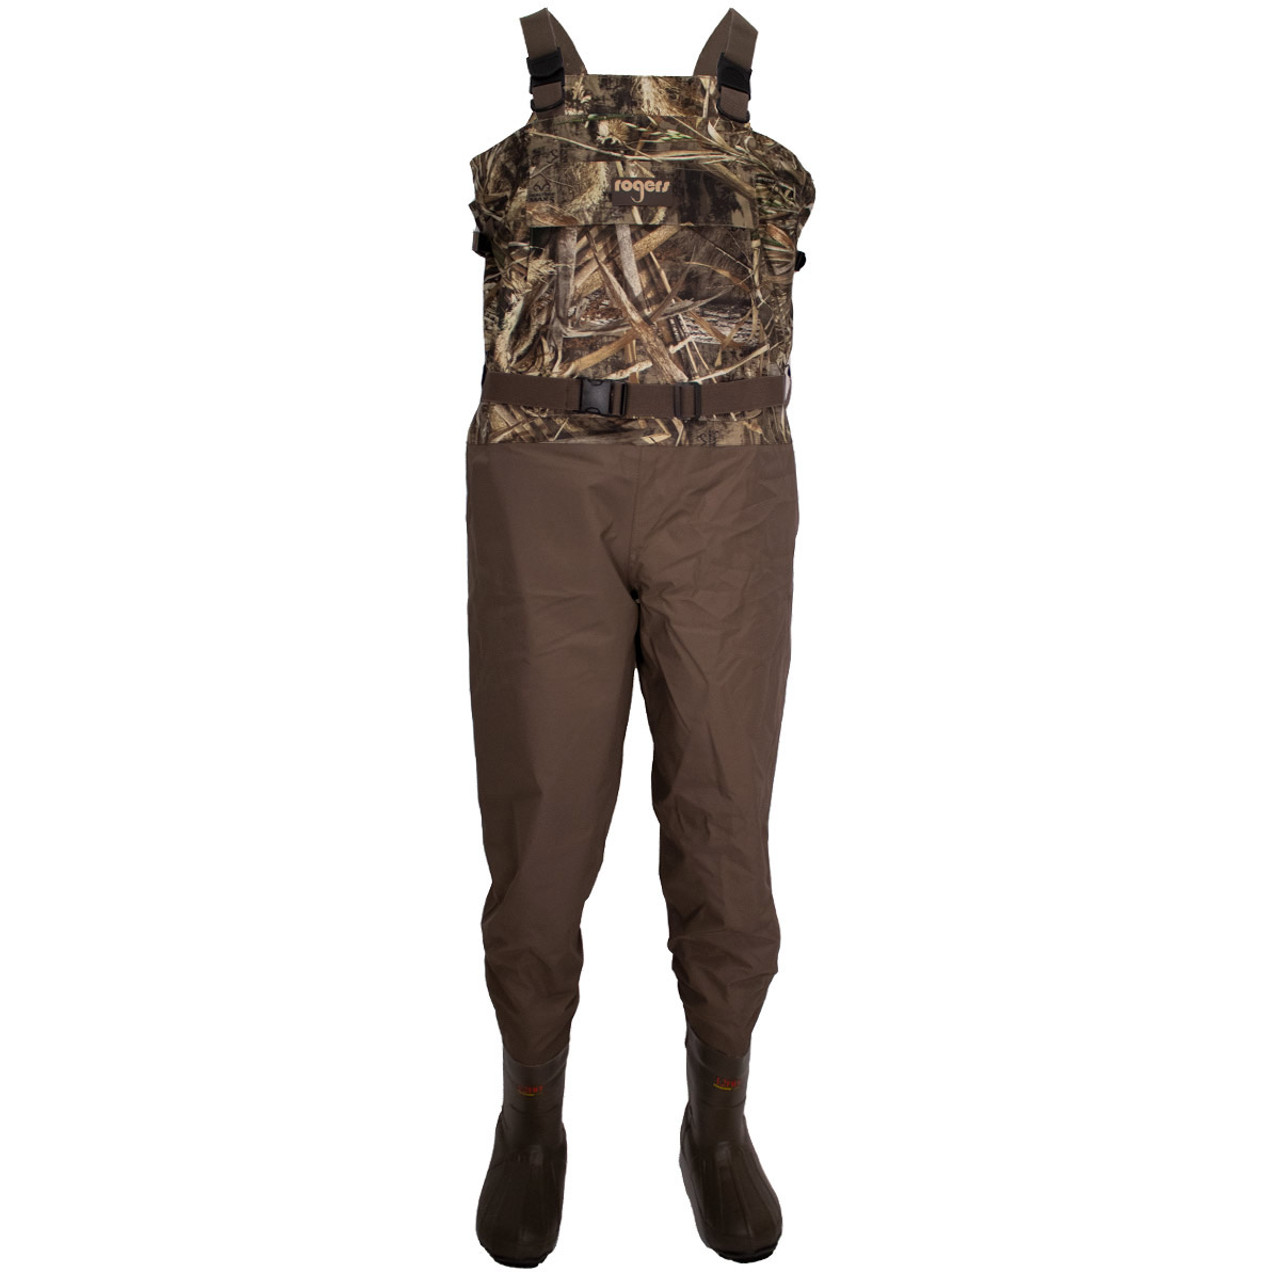 Rogers 2-in-1 Workin' Man Insulated Breathable Wader